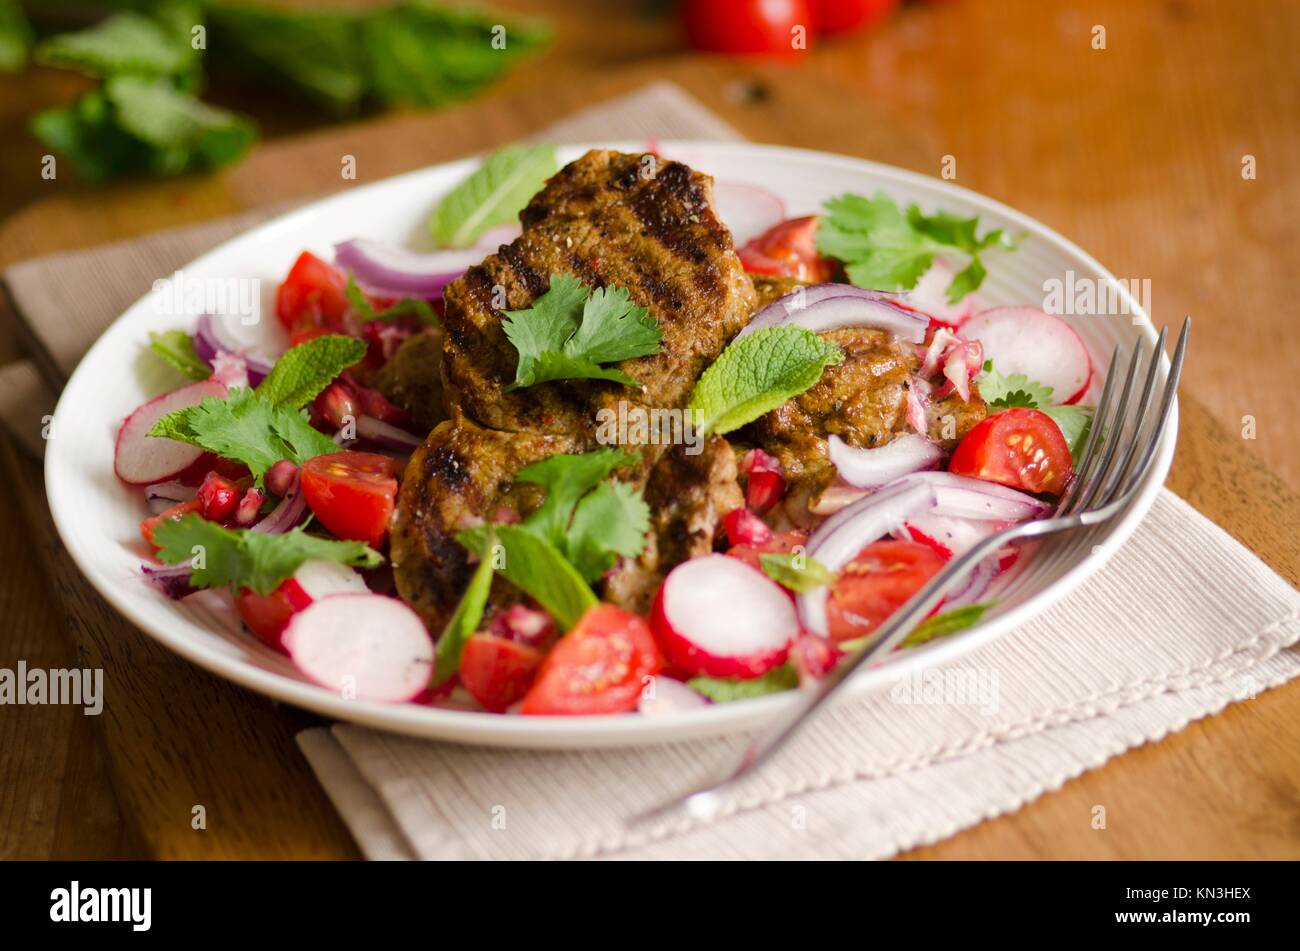 Sizzled masala lamb with chopped salad on a plate. Stock Photo